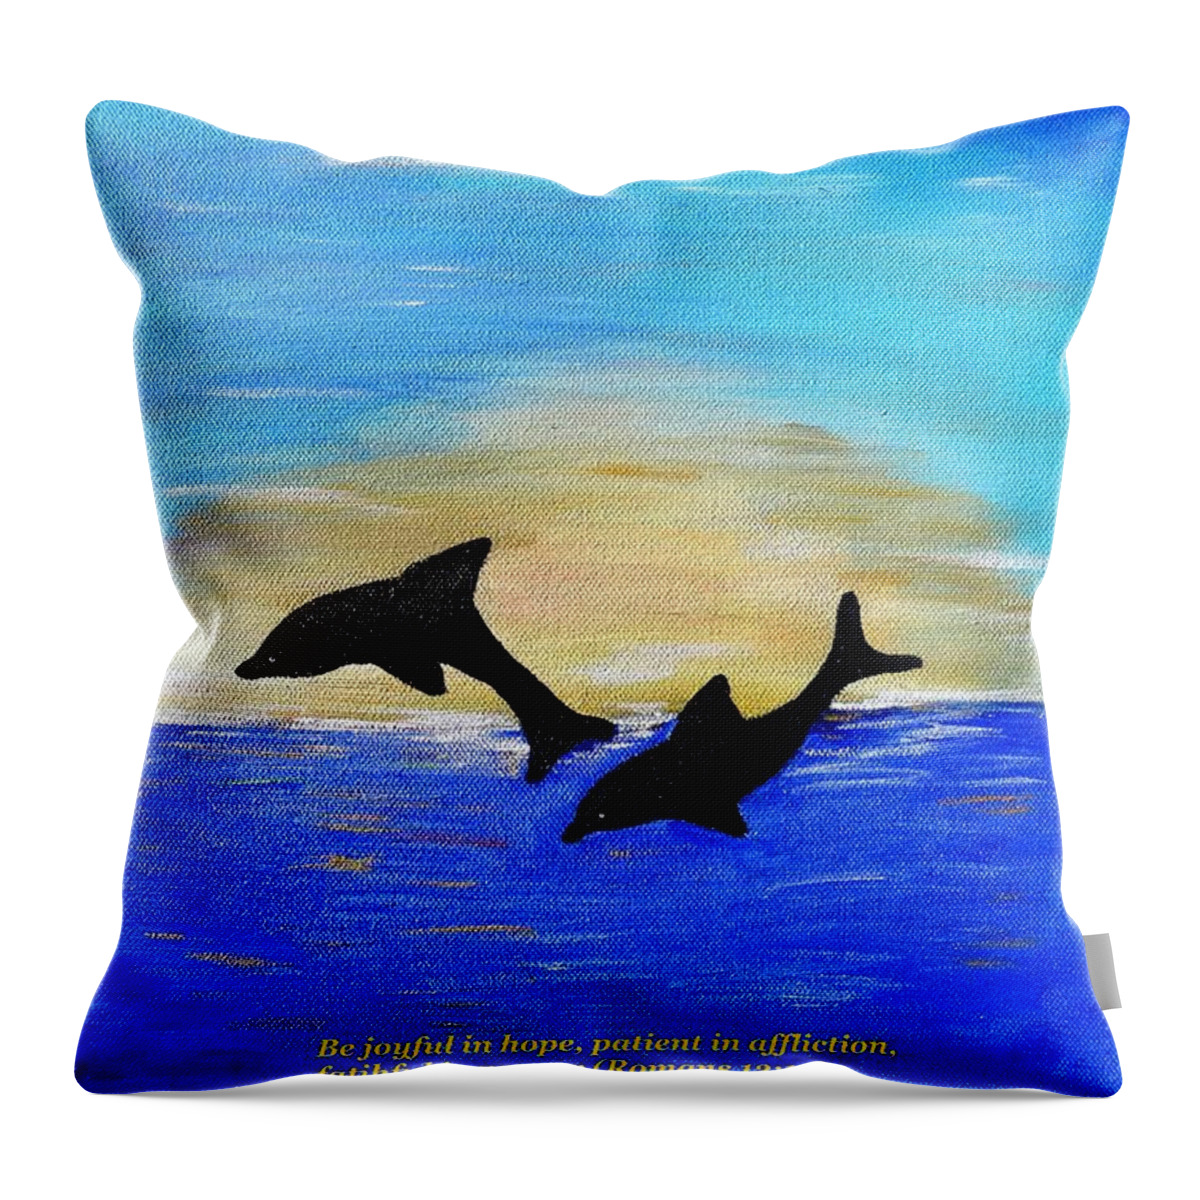 Dolphins Throw Pillow featuring the painting Be Joyful in Hope by Karen Jane Jones